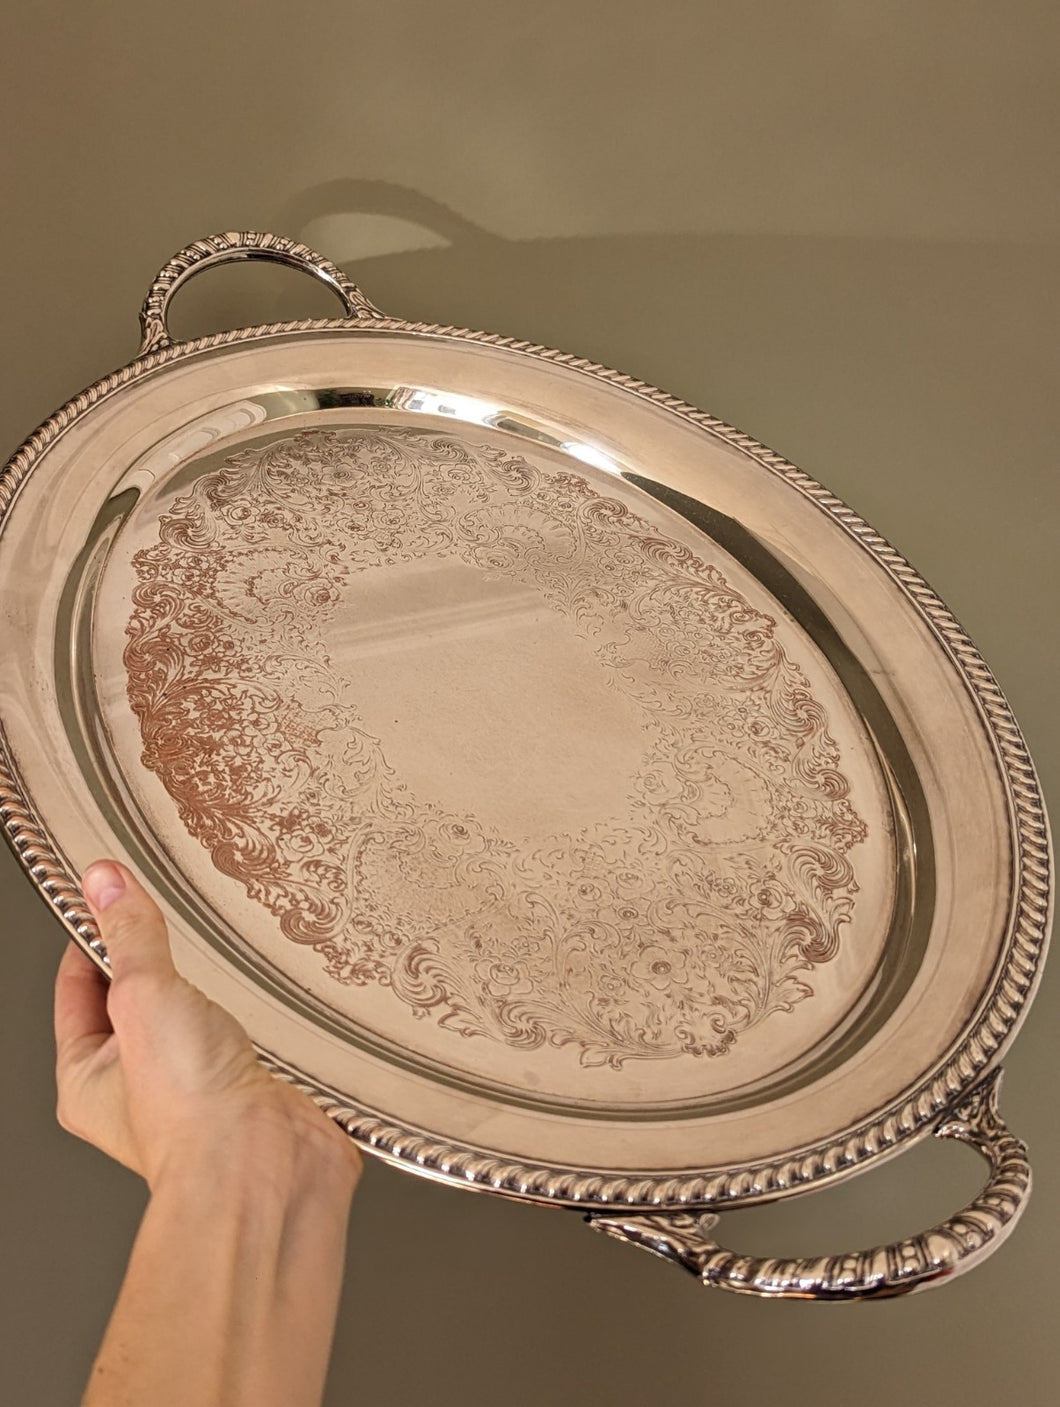 silver tray being held by hand